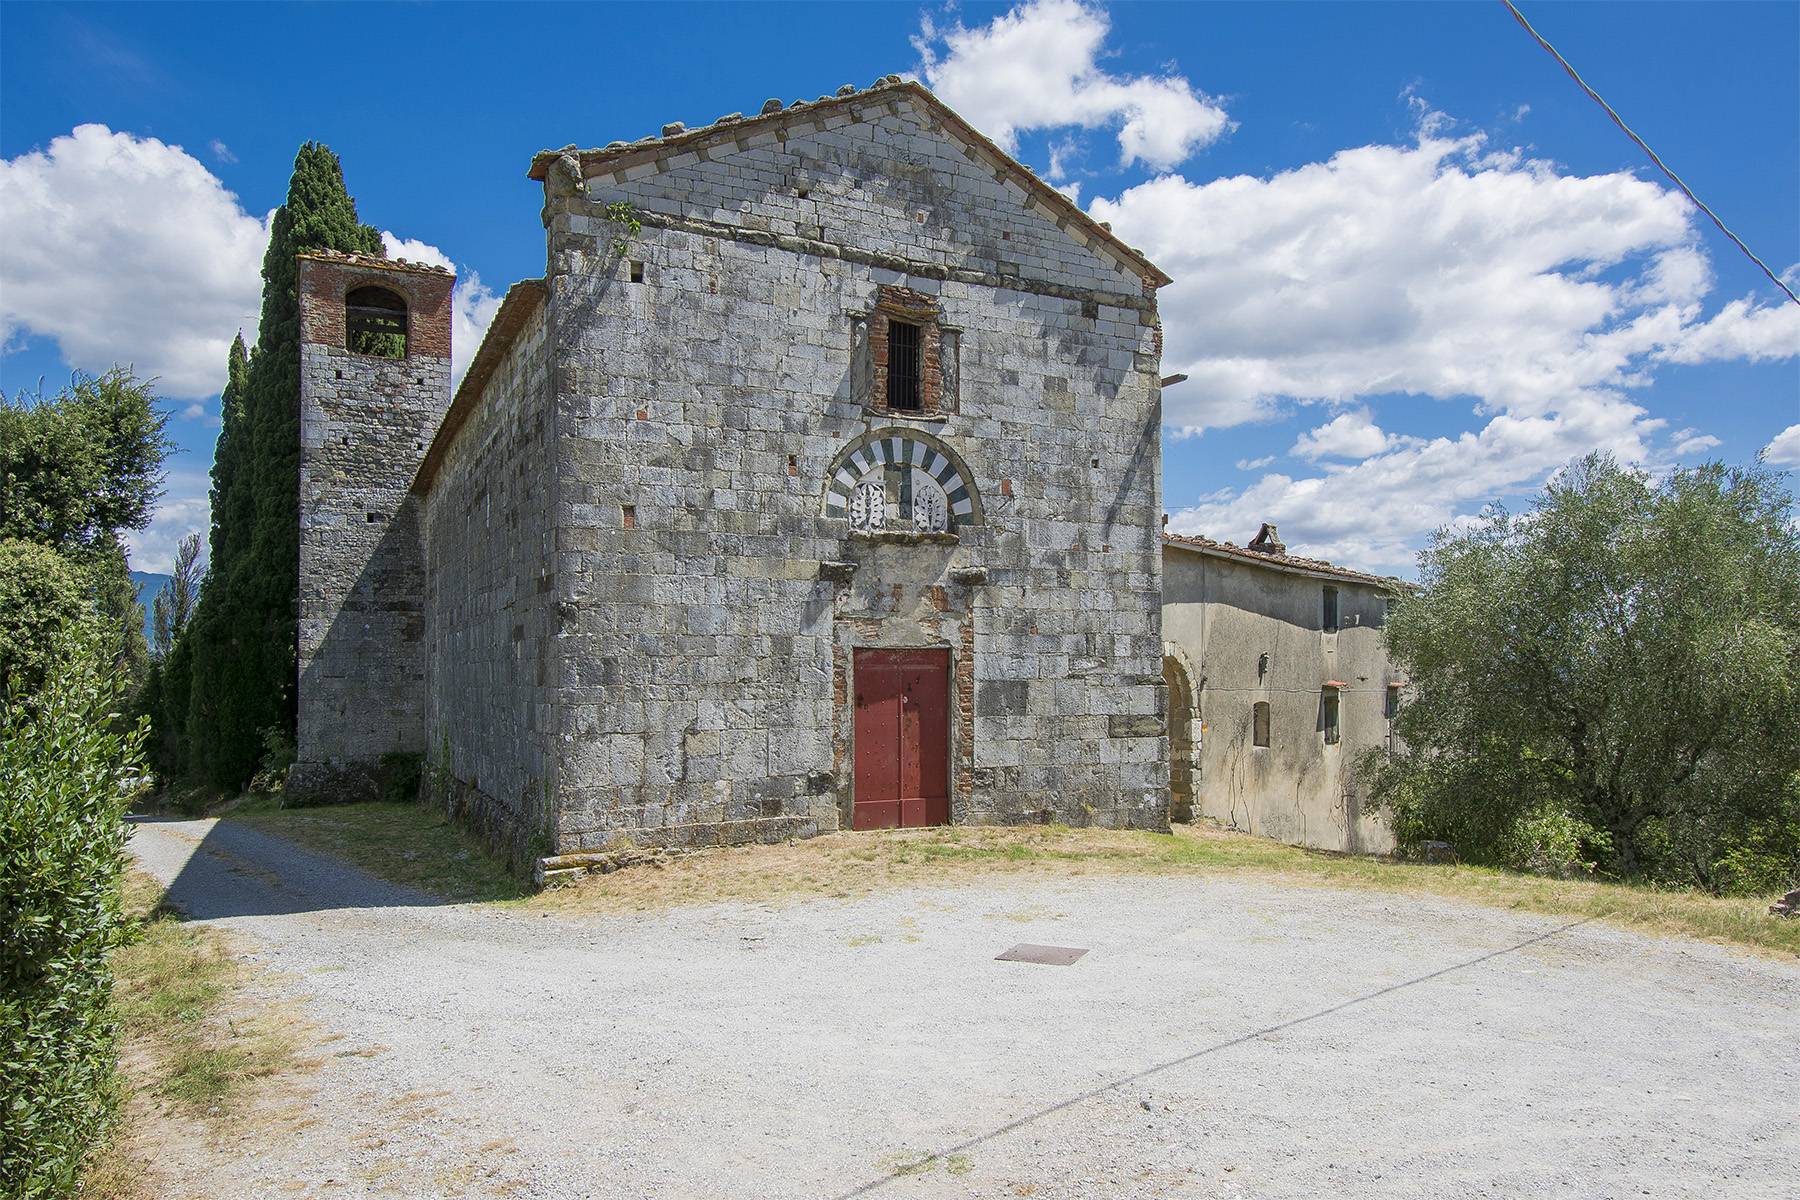 Charming farmhouse with a Xth century parish church in the Pistoia countryside